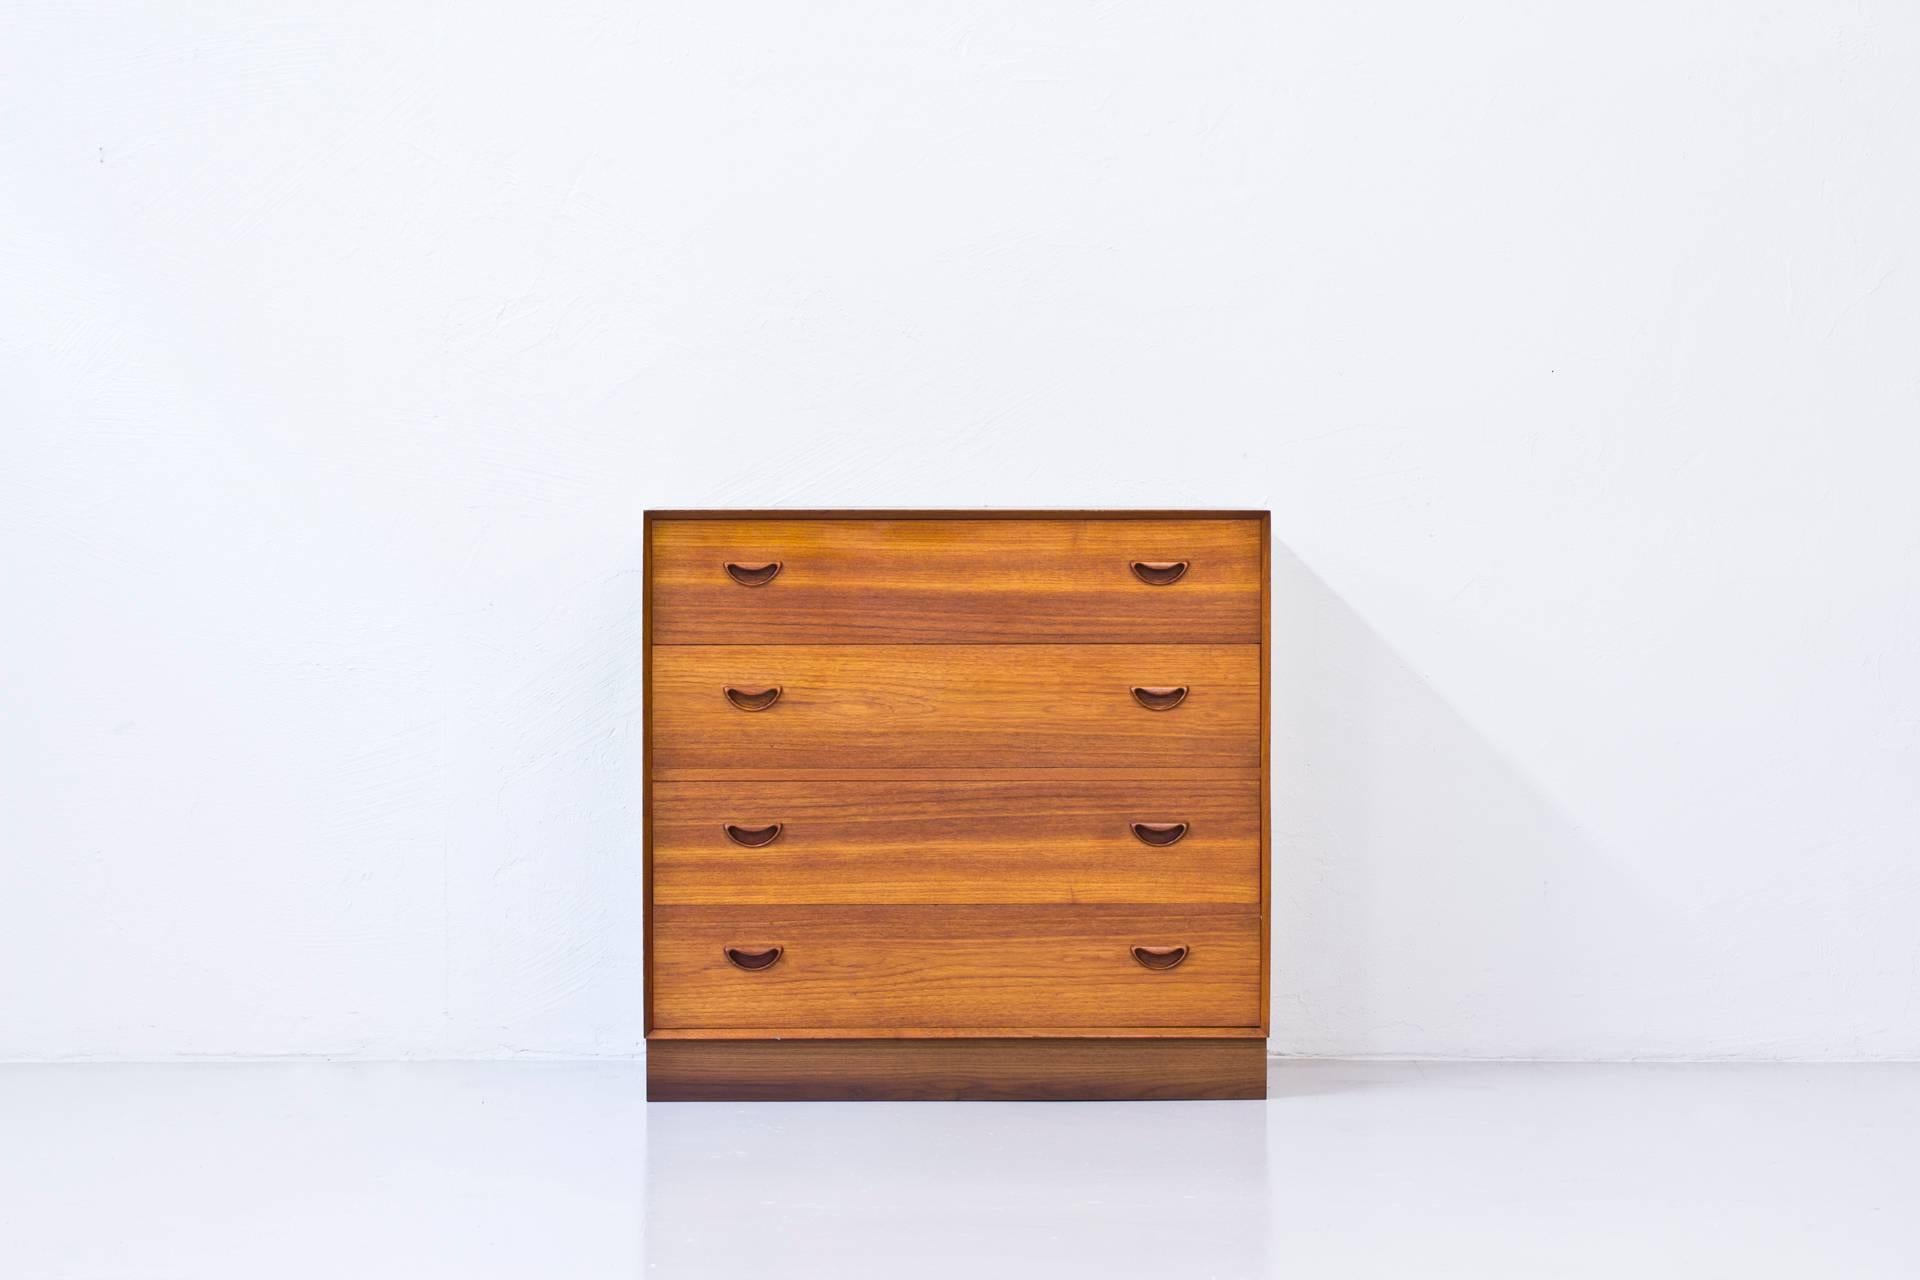 Rare chest of drawers with built in vanity designed by Peter Hvidt & Orla Molgaard Nielsen. Produced by Soborg Møbler in Denmark during the 1950s. The chest is built almost entirely in solid teak with visible joinery on the out- as well as inside of